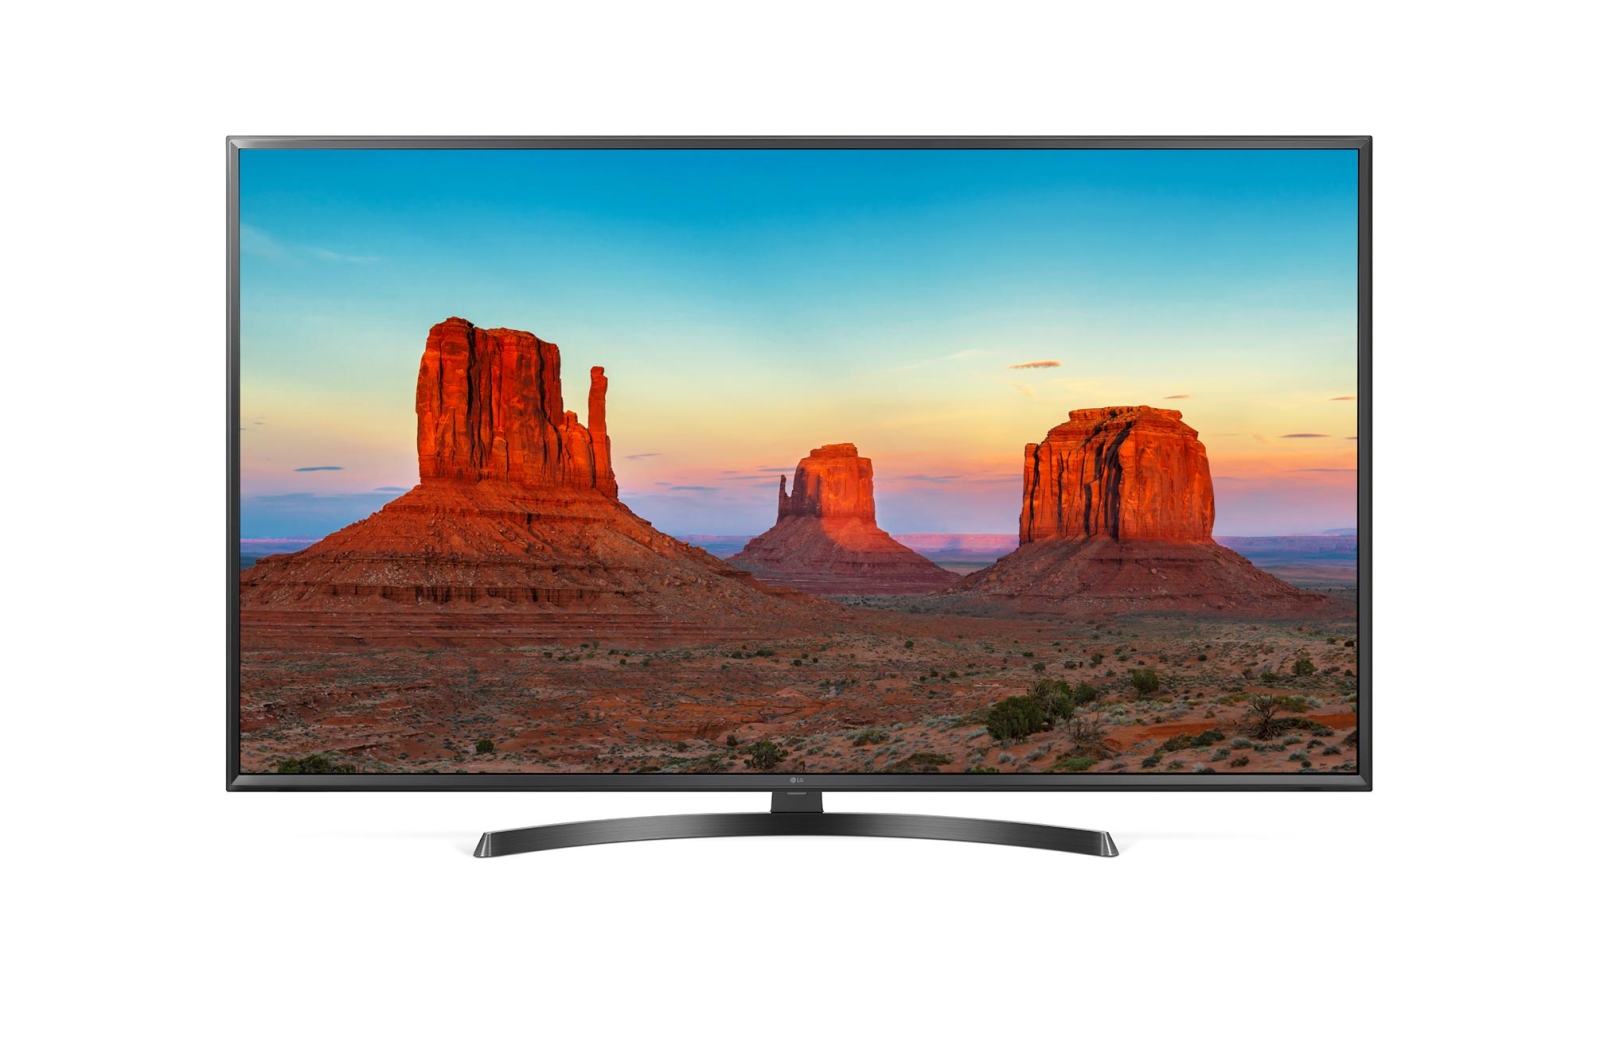 LG 65UK6400PVC 65 Inch 4K UHD TV with IPS Display & Active HDR